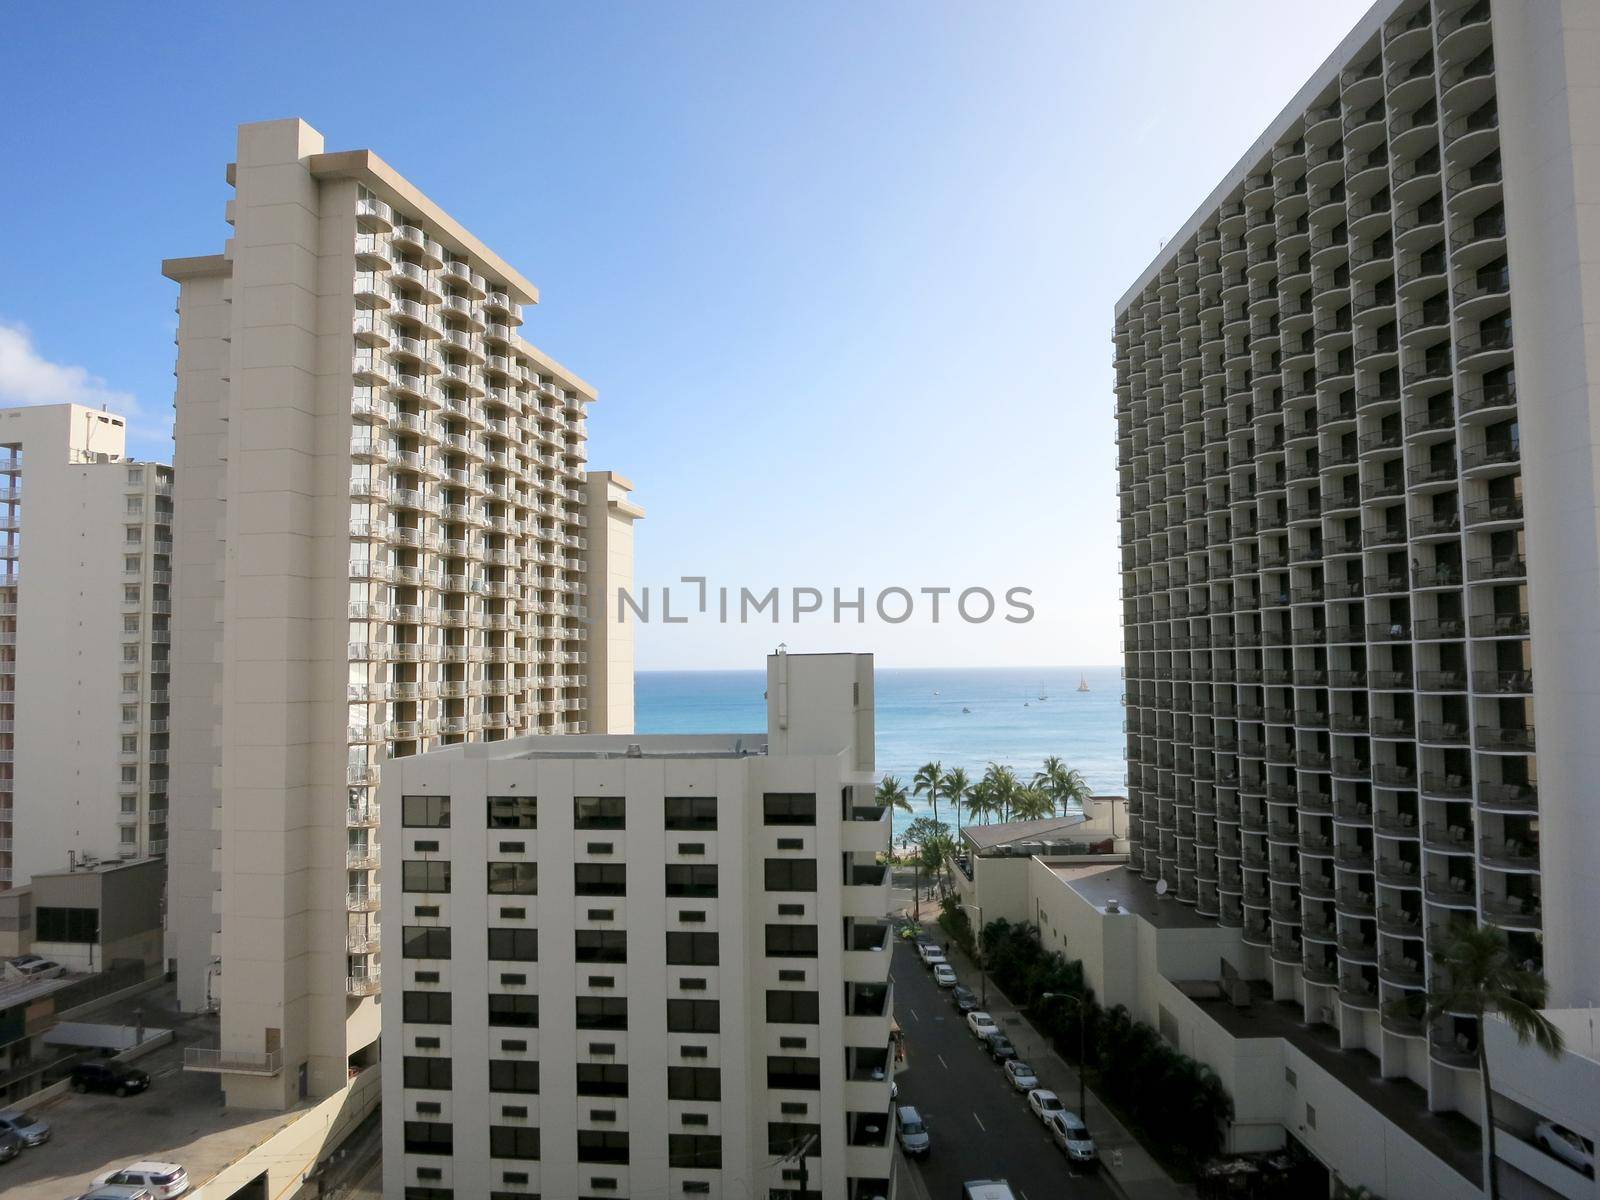 Waikiki Hotels and Ocean during day by EricGBVD